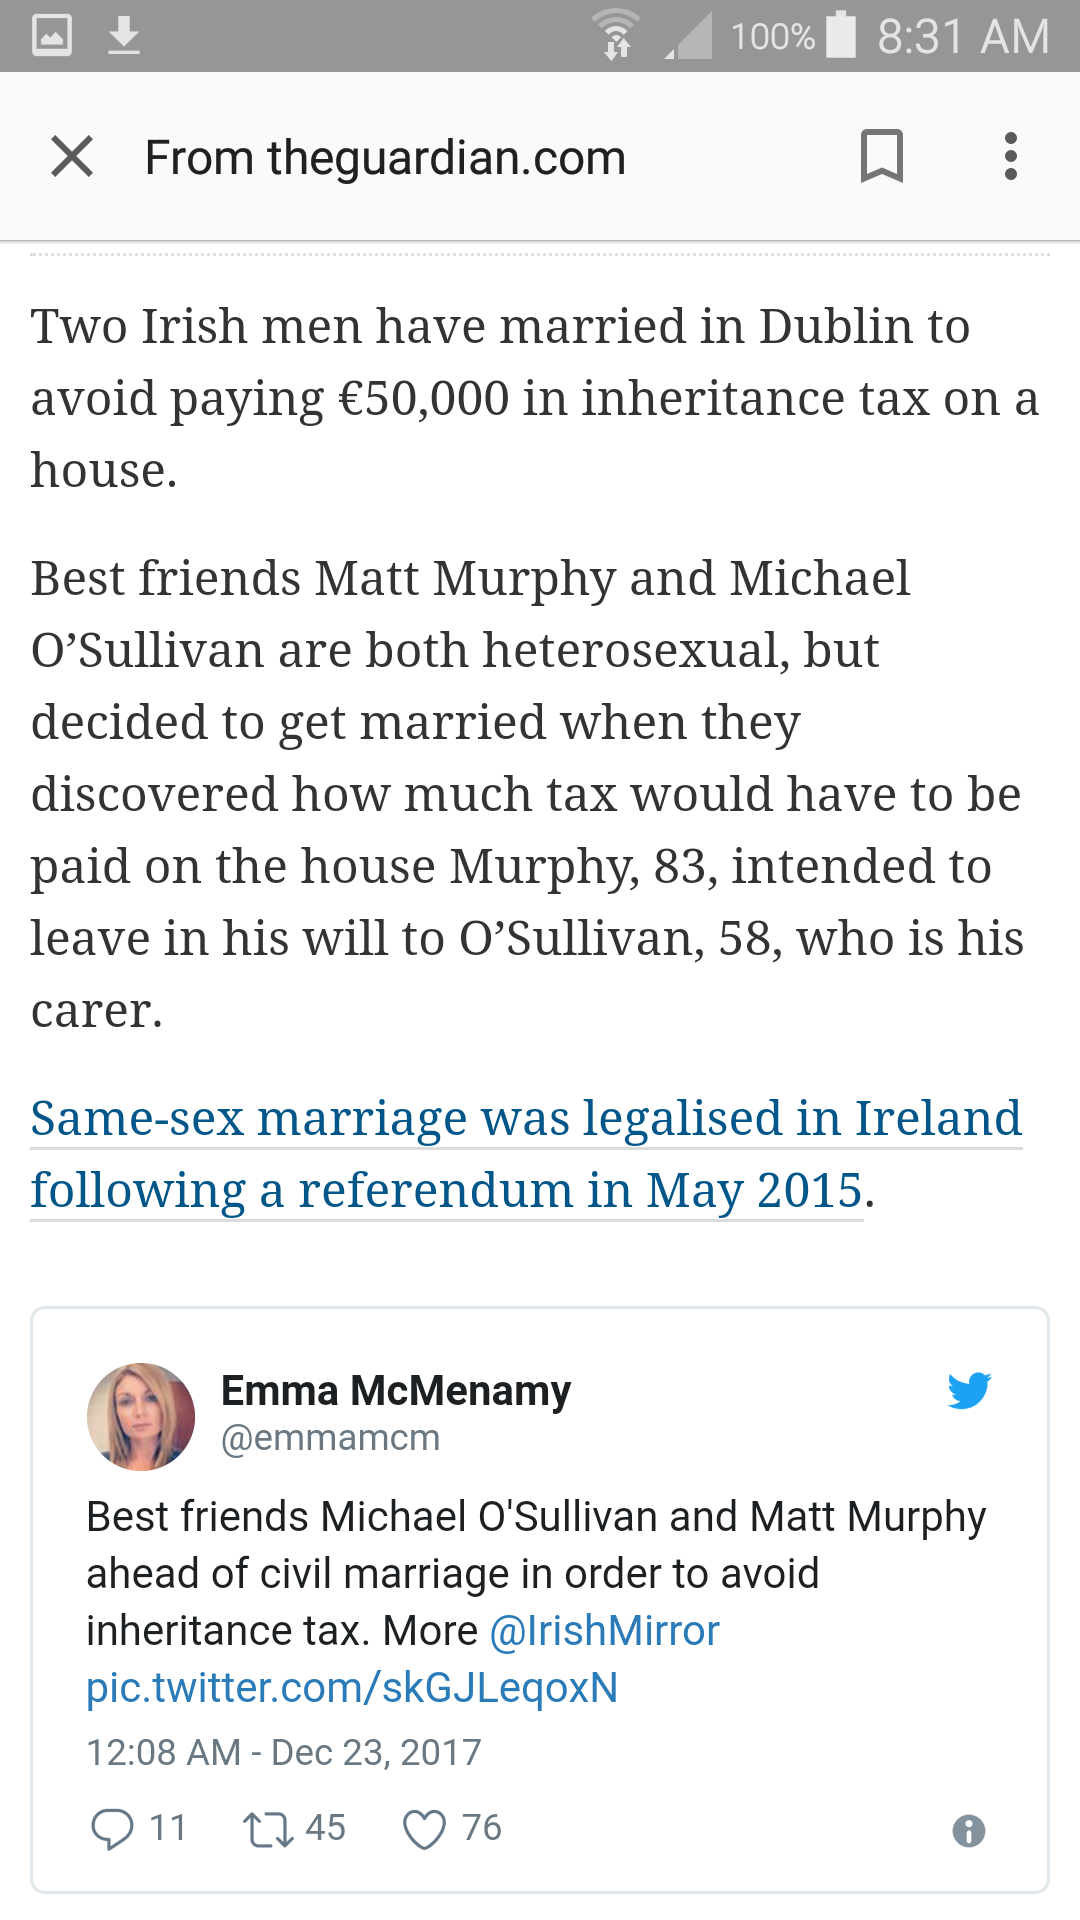 screenshot - at 100% | X From theguardian.com Two Irish men have married in Dublin to avoid paying 50,000 in inheritance tax on a house. Best friends Matt Murphy and Michael O'Sullivan are both heterosexual, but decided to get married when they discovered